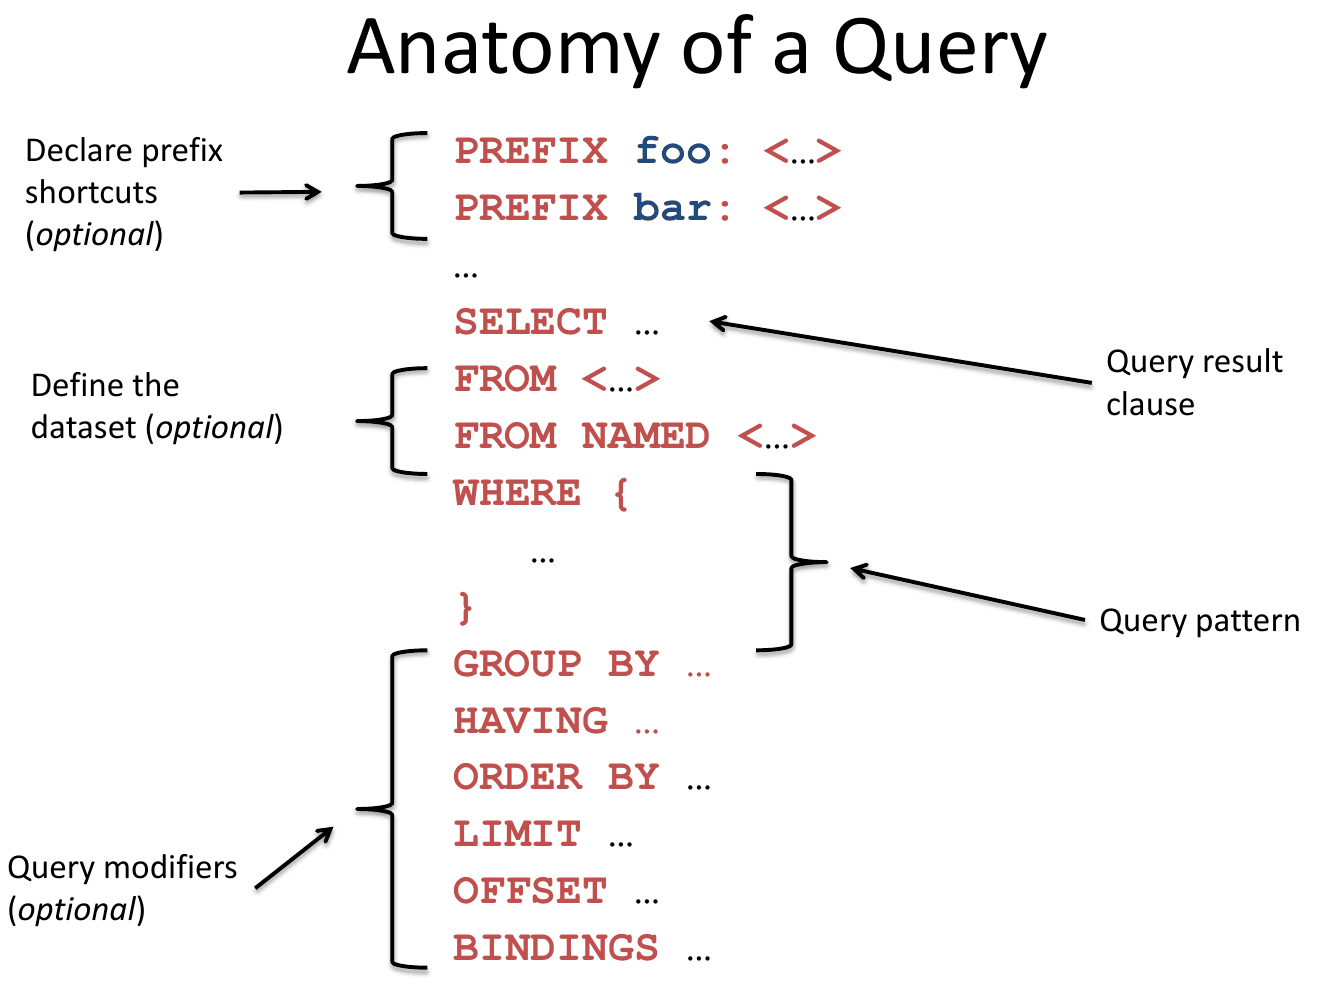 The anatomy of a SPARQL query